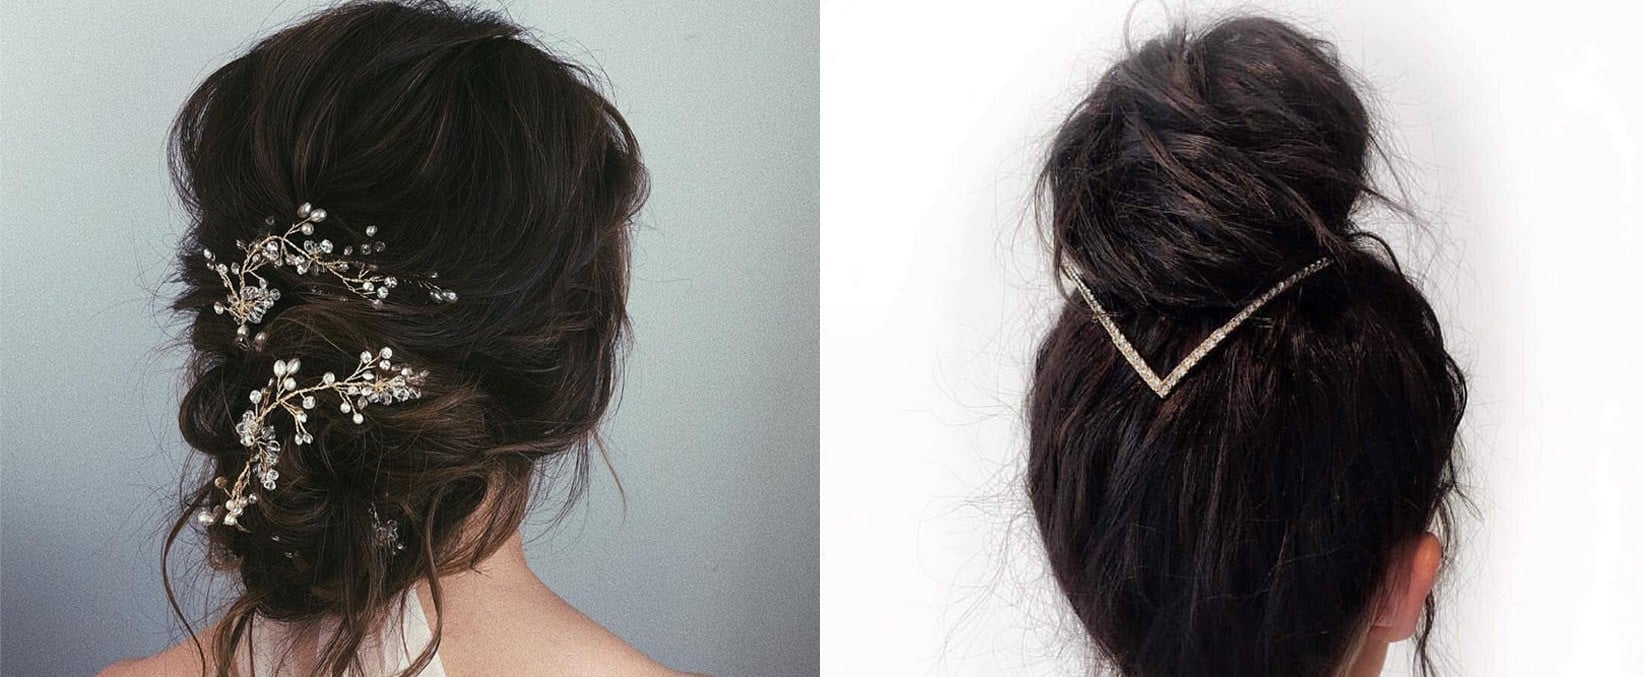 How to Do a Messy Bun  The Perfect Messy Bun for Every Hair Type  IPSY